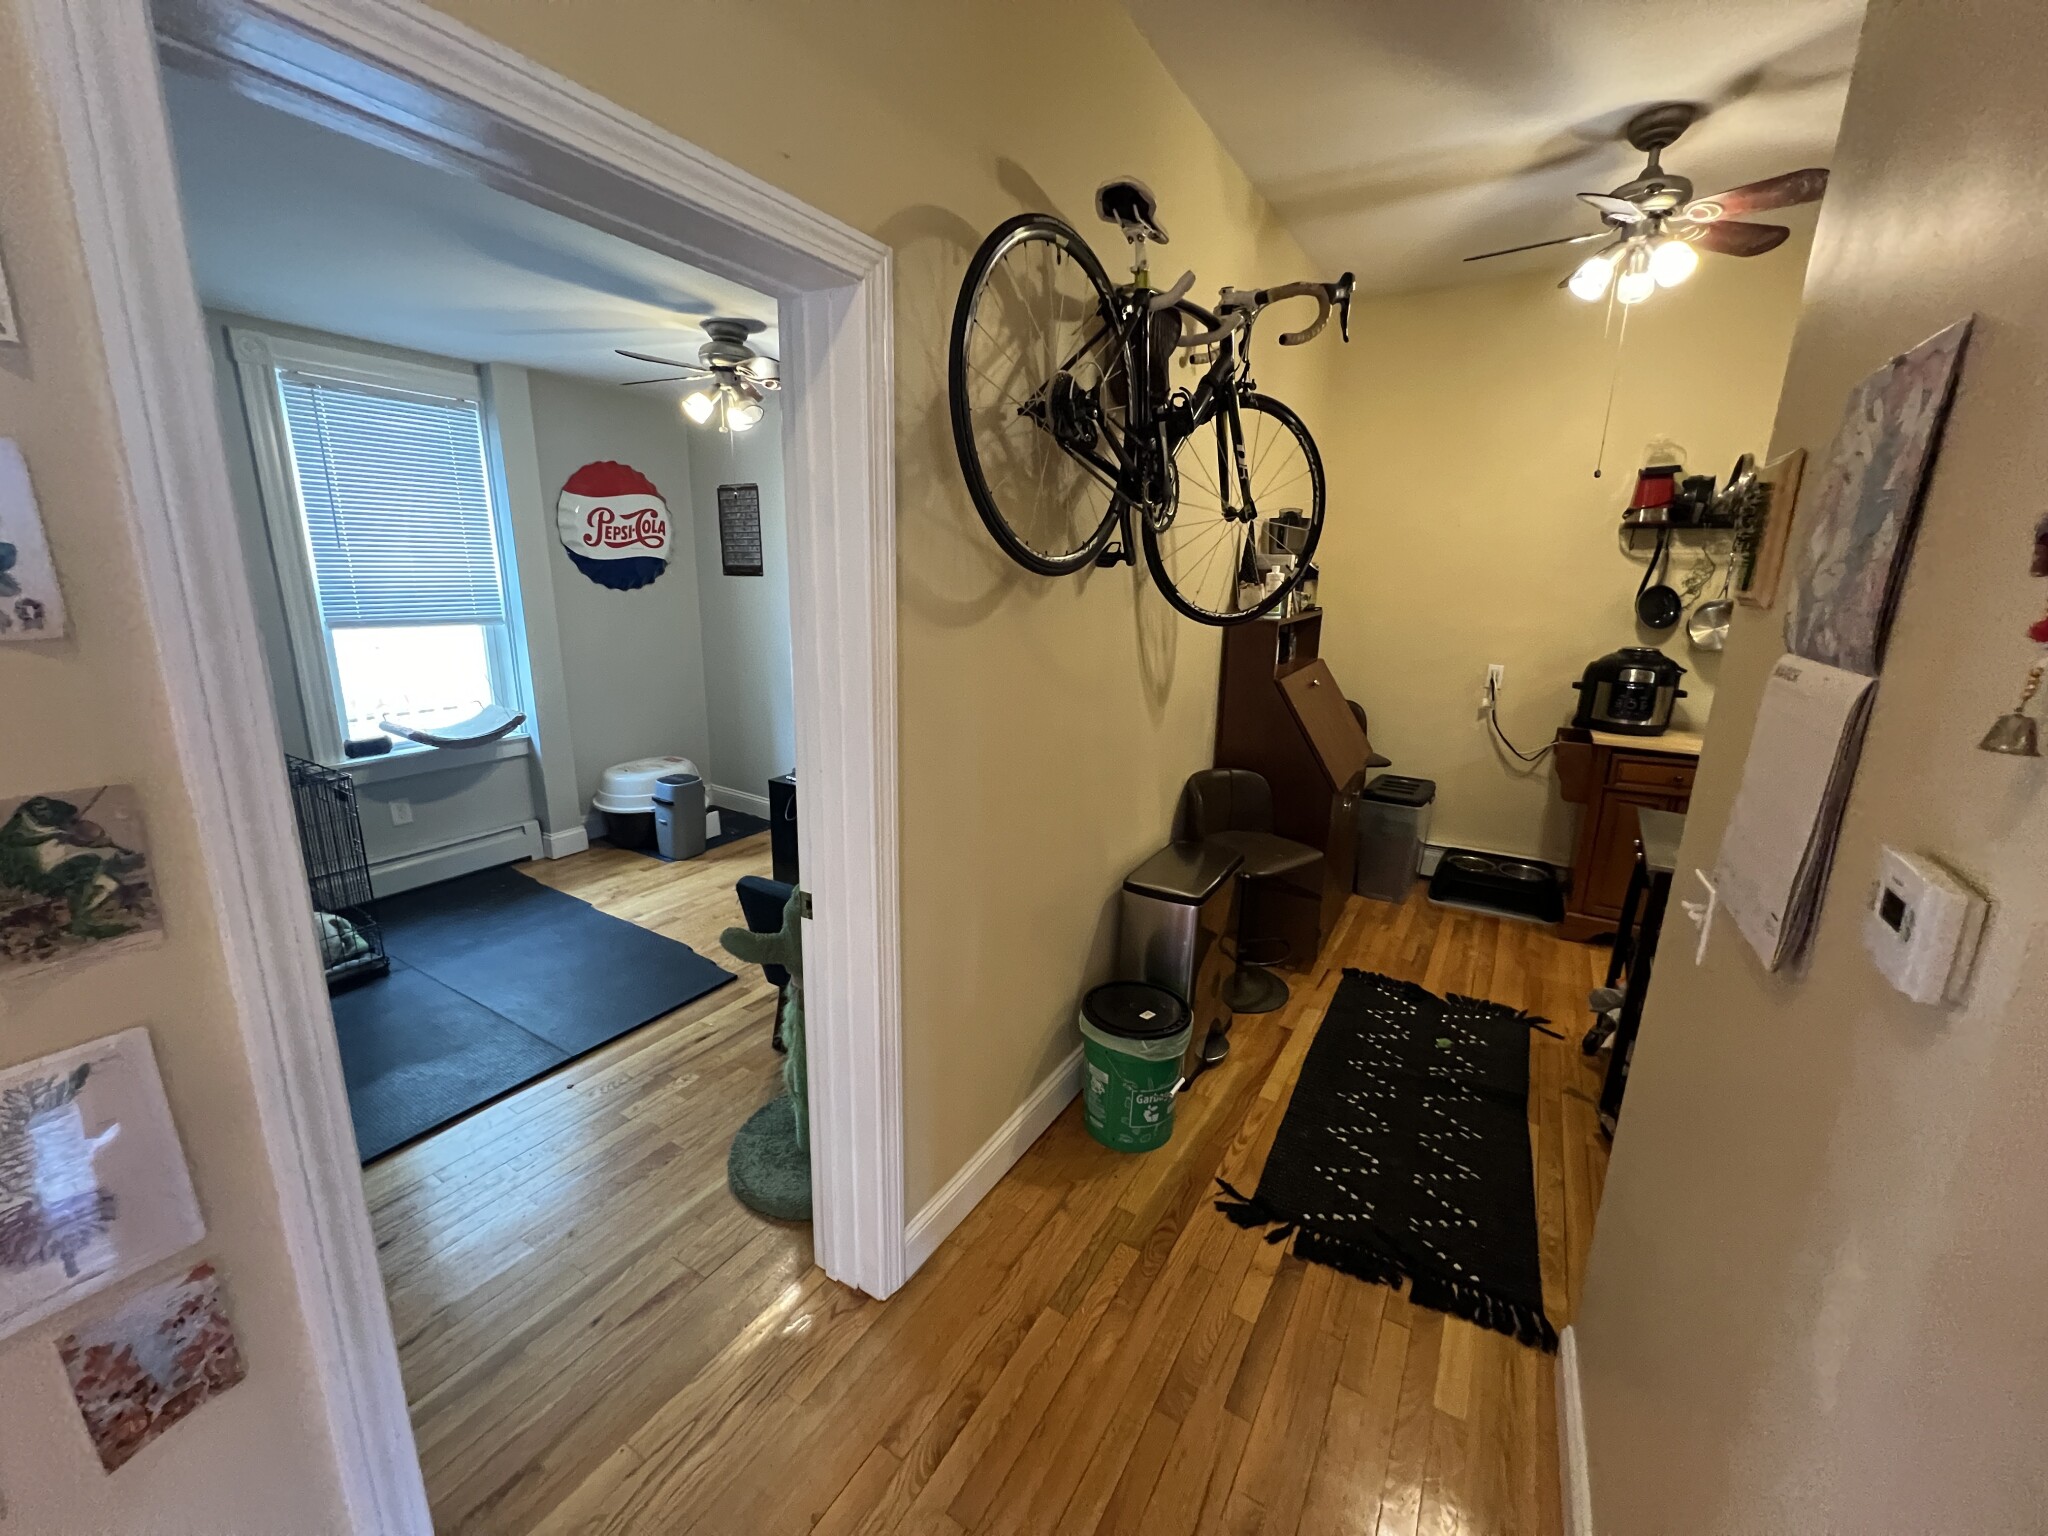 Photos of apartment on Victoria St.,Somerville MA 02144